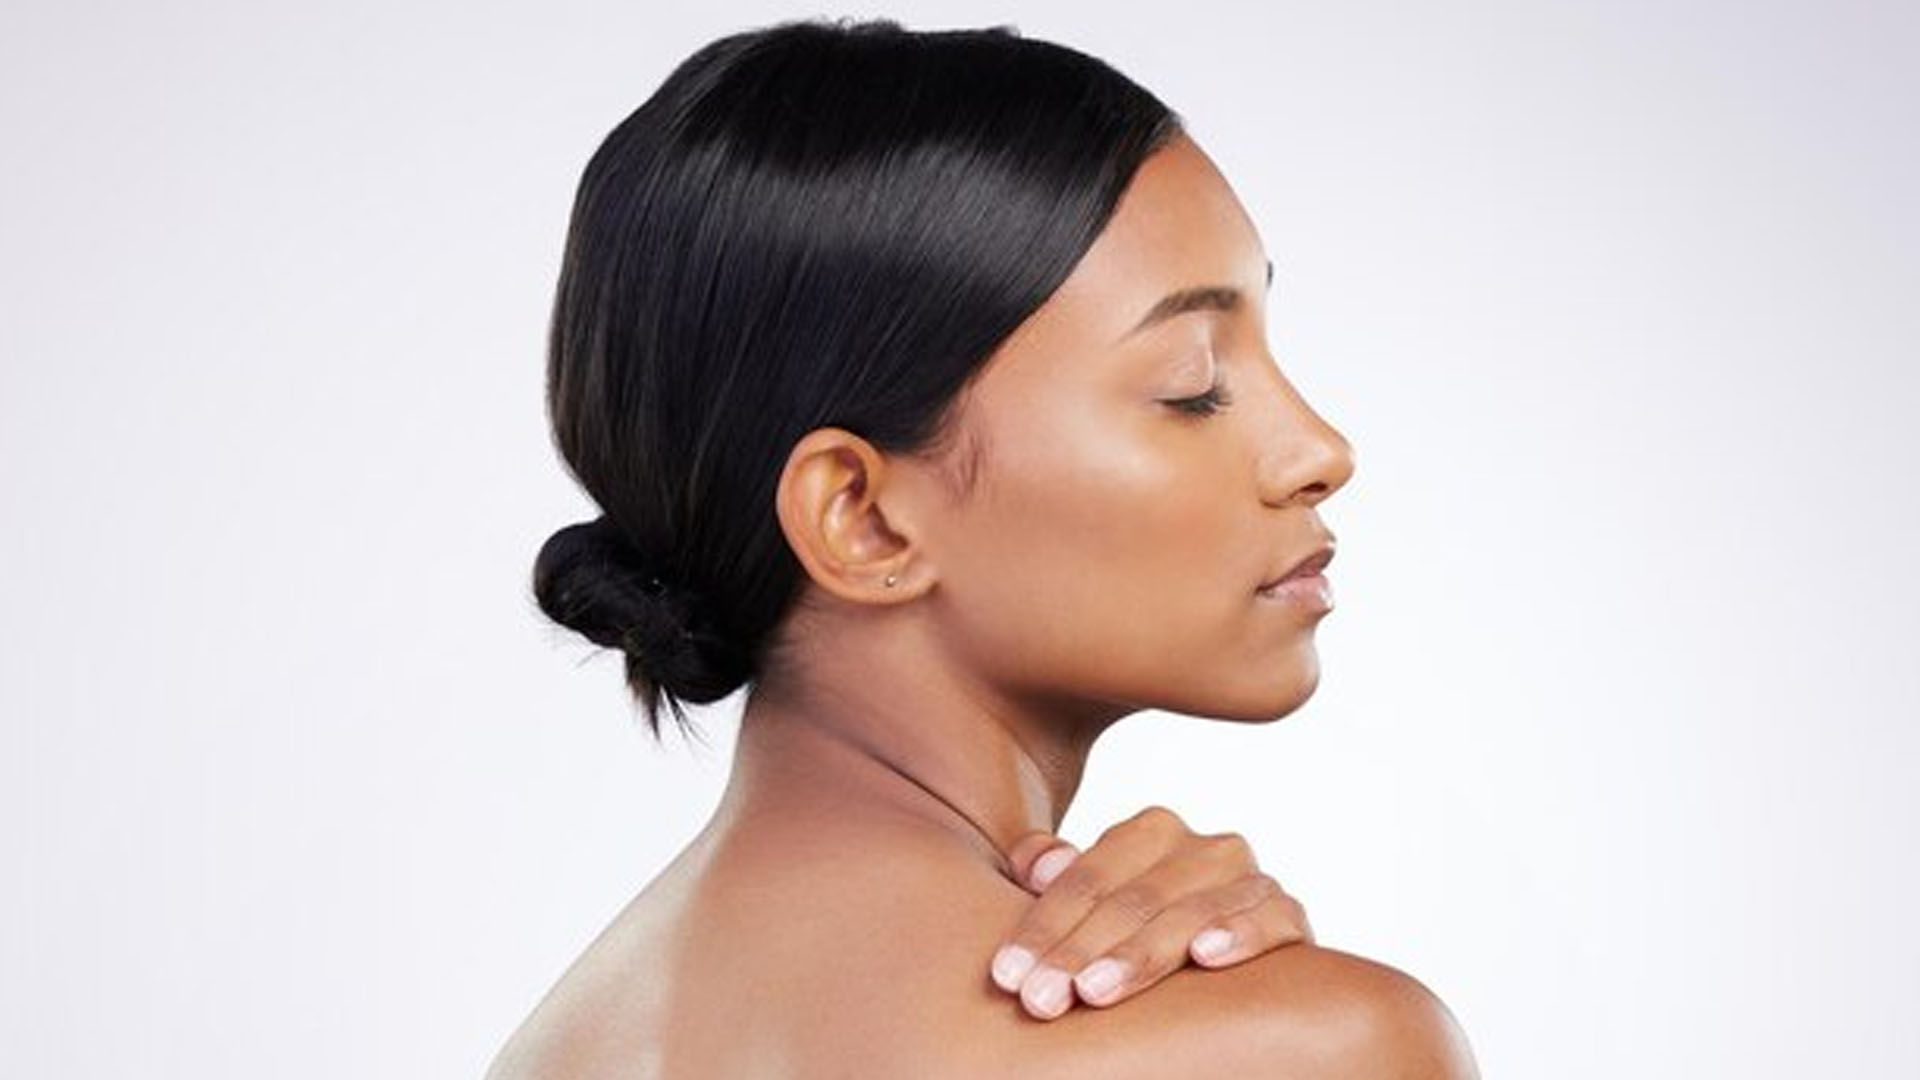 What are the Home Remedies for Black Neck?